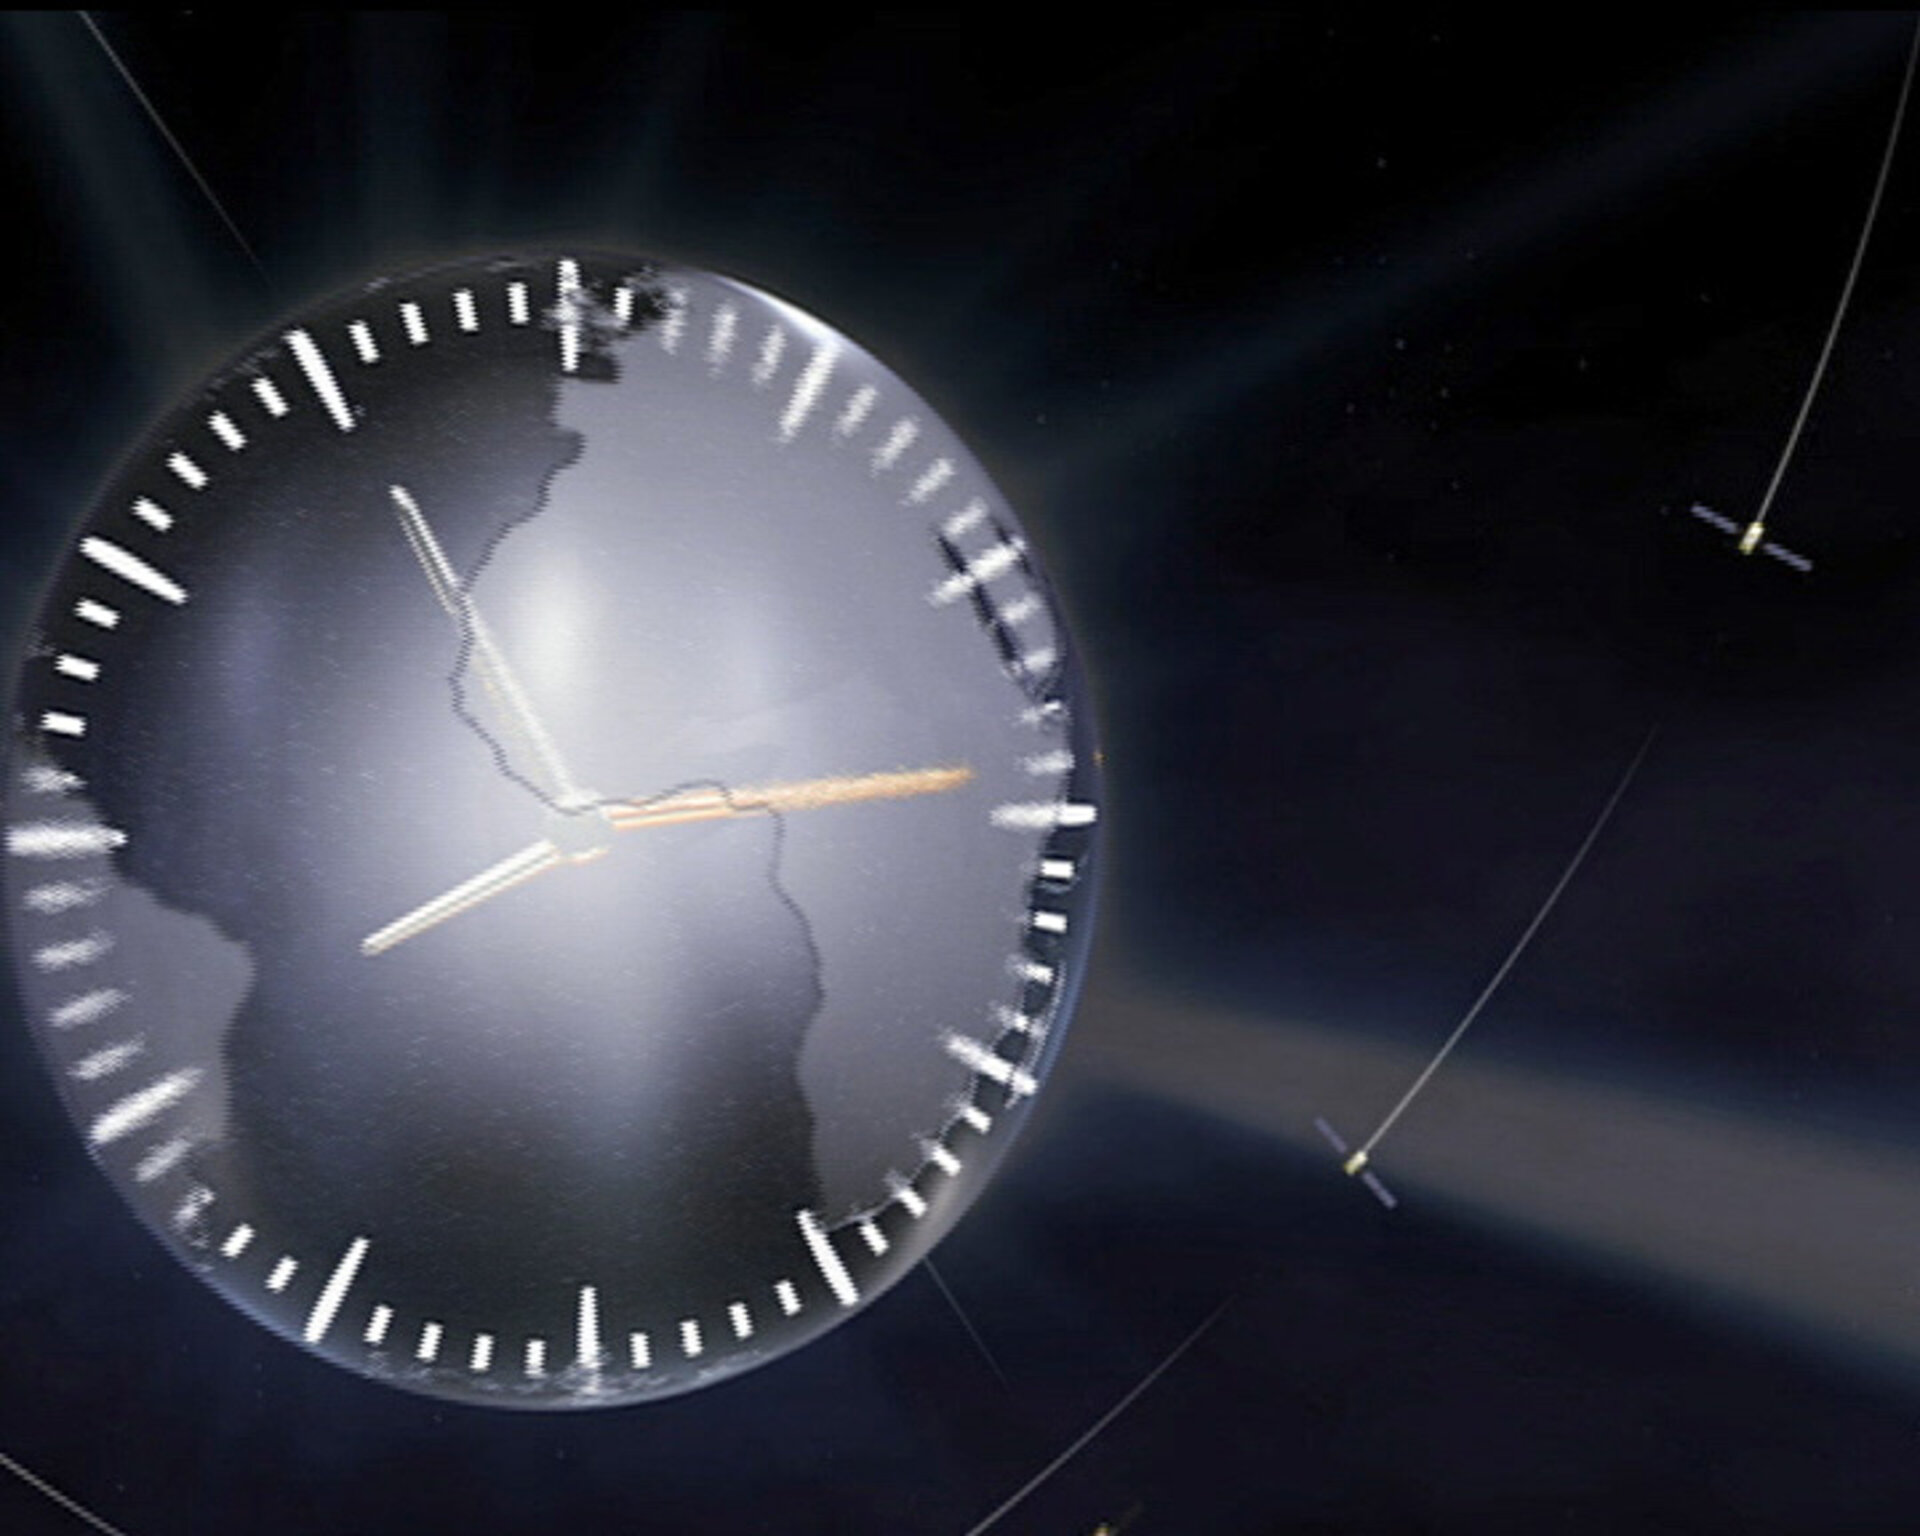 112 Atomic Clock Stock Video Footage - 4K and HD Video Clips | Shutterstock